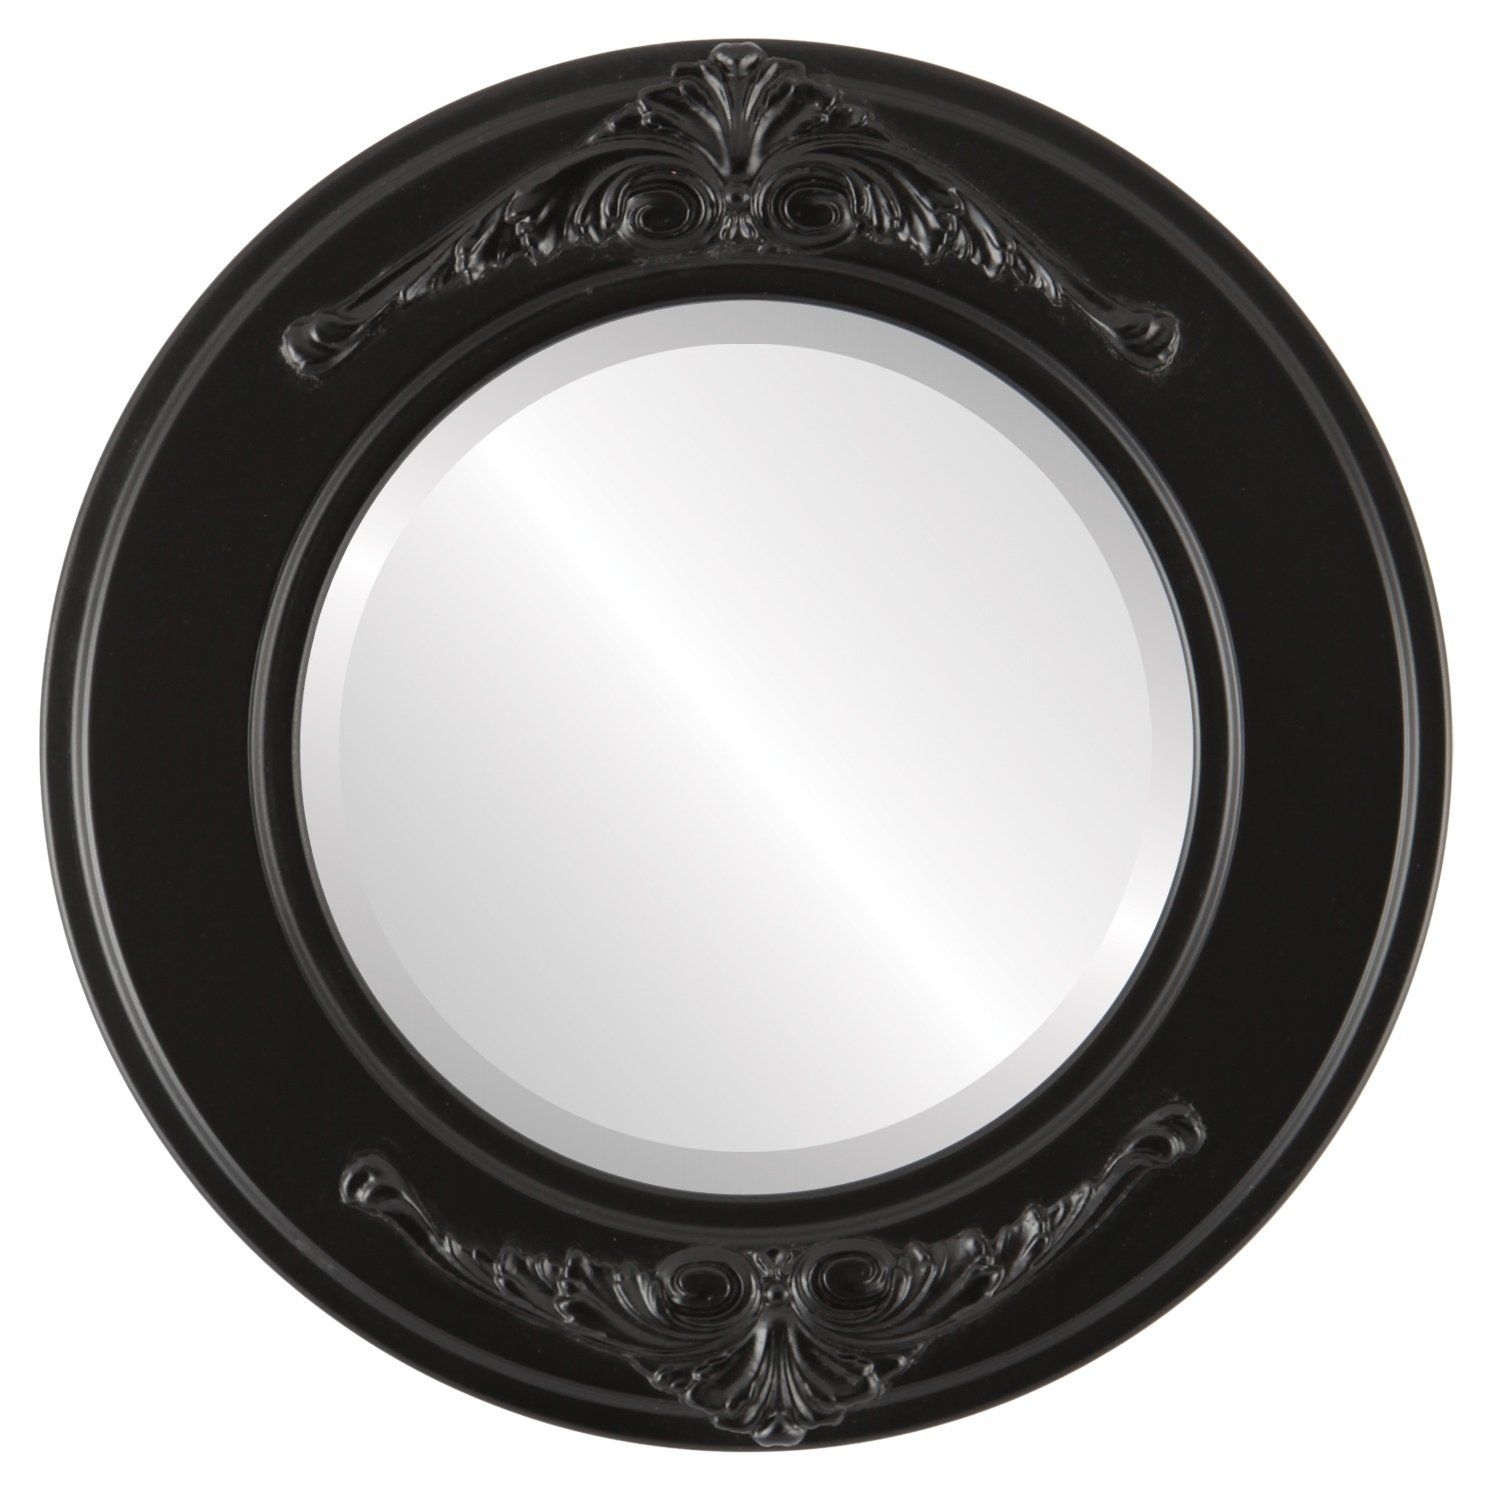 Ramino Framed Round Mirror In Matte Black (19x19) In 2020 | Round Inside Matte Black Metal Wall Mirrors (View 11 of 15)